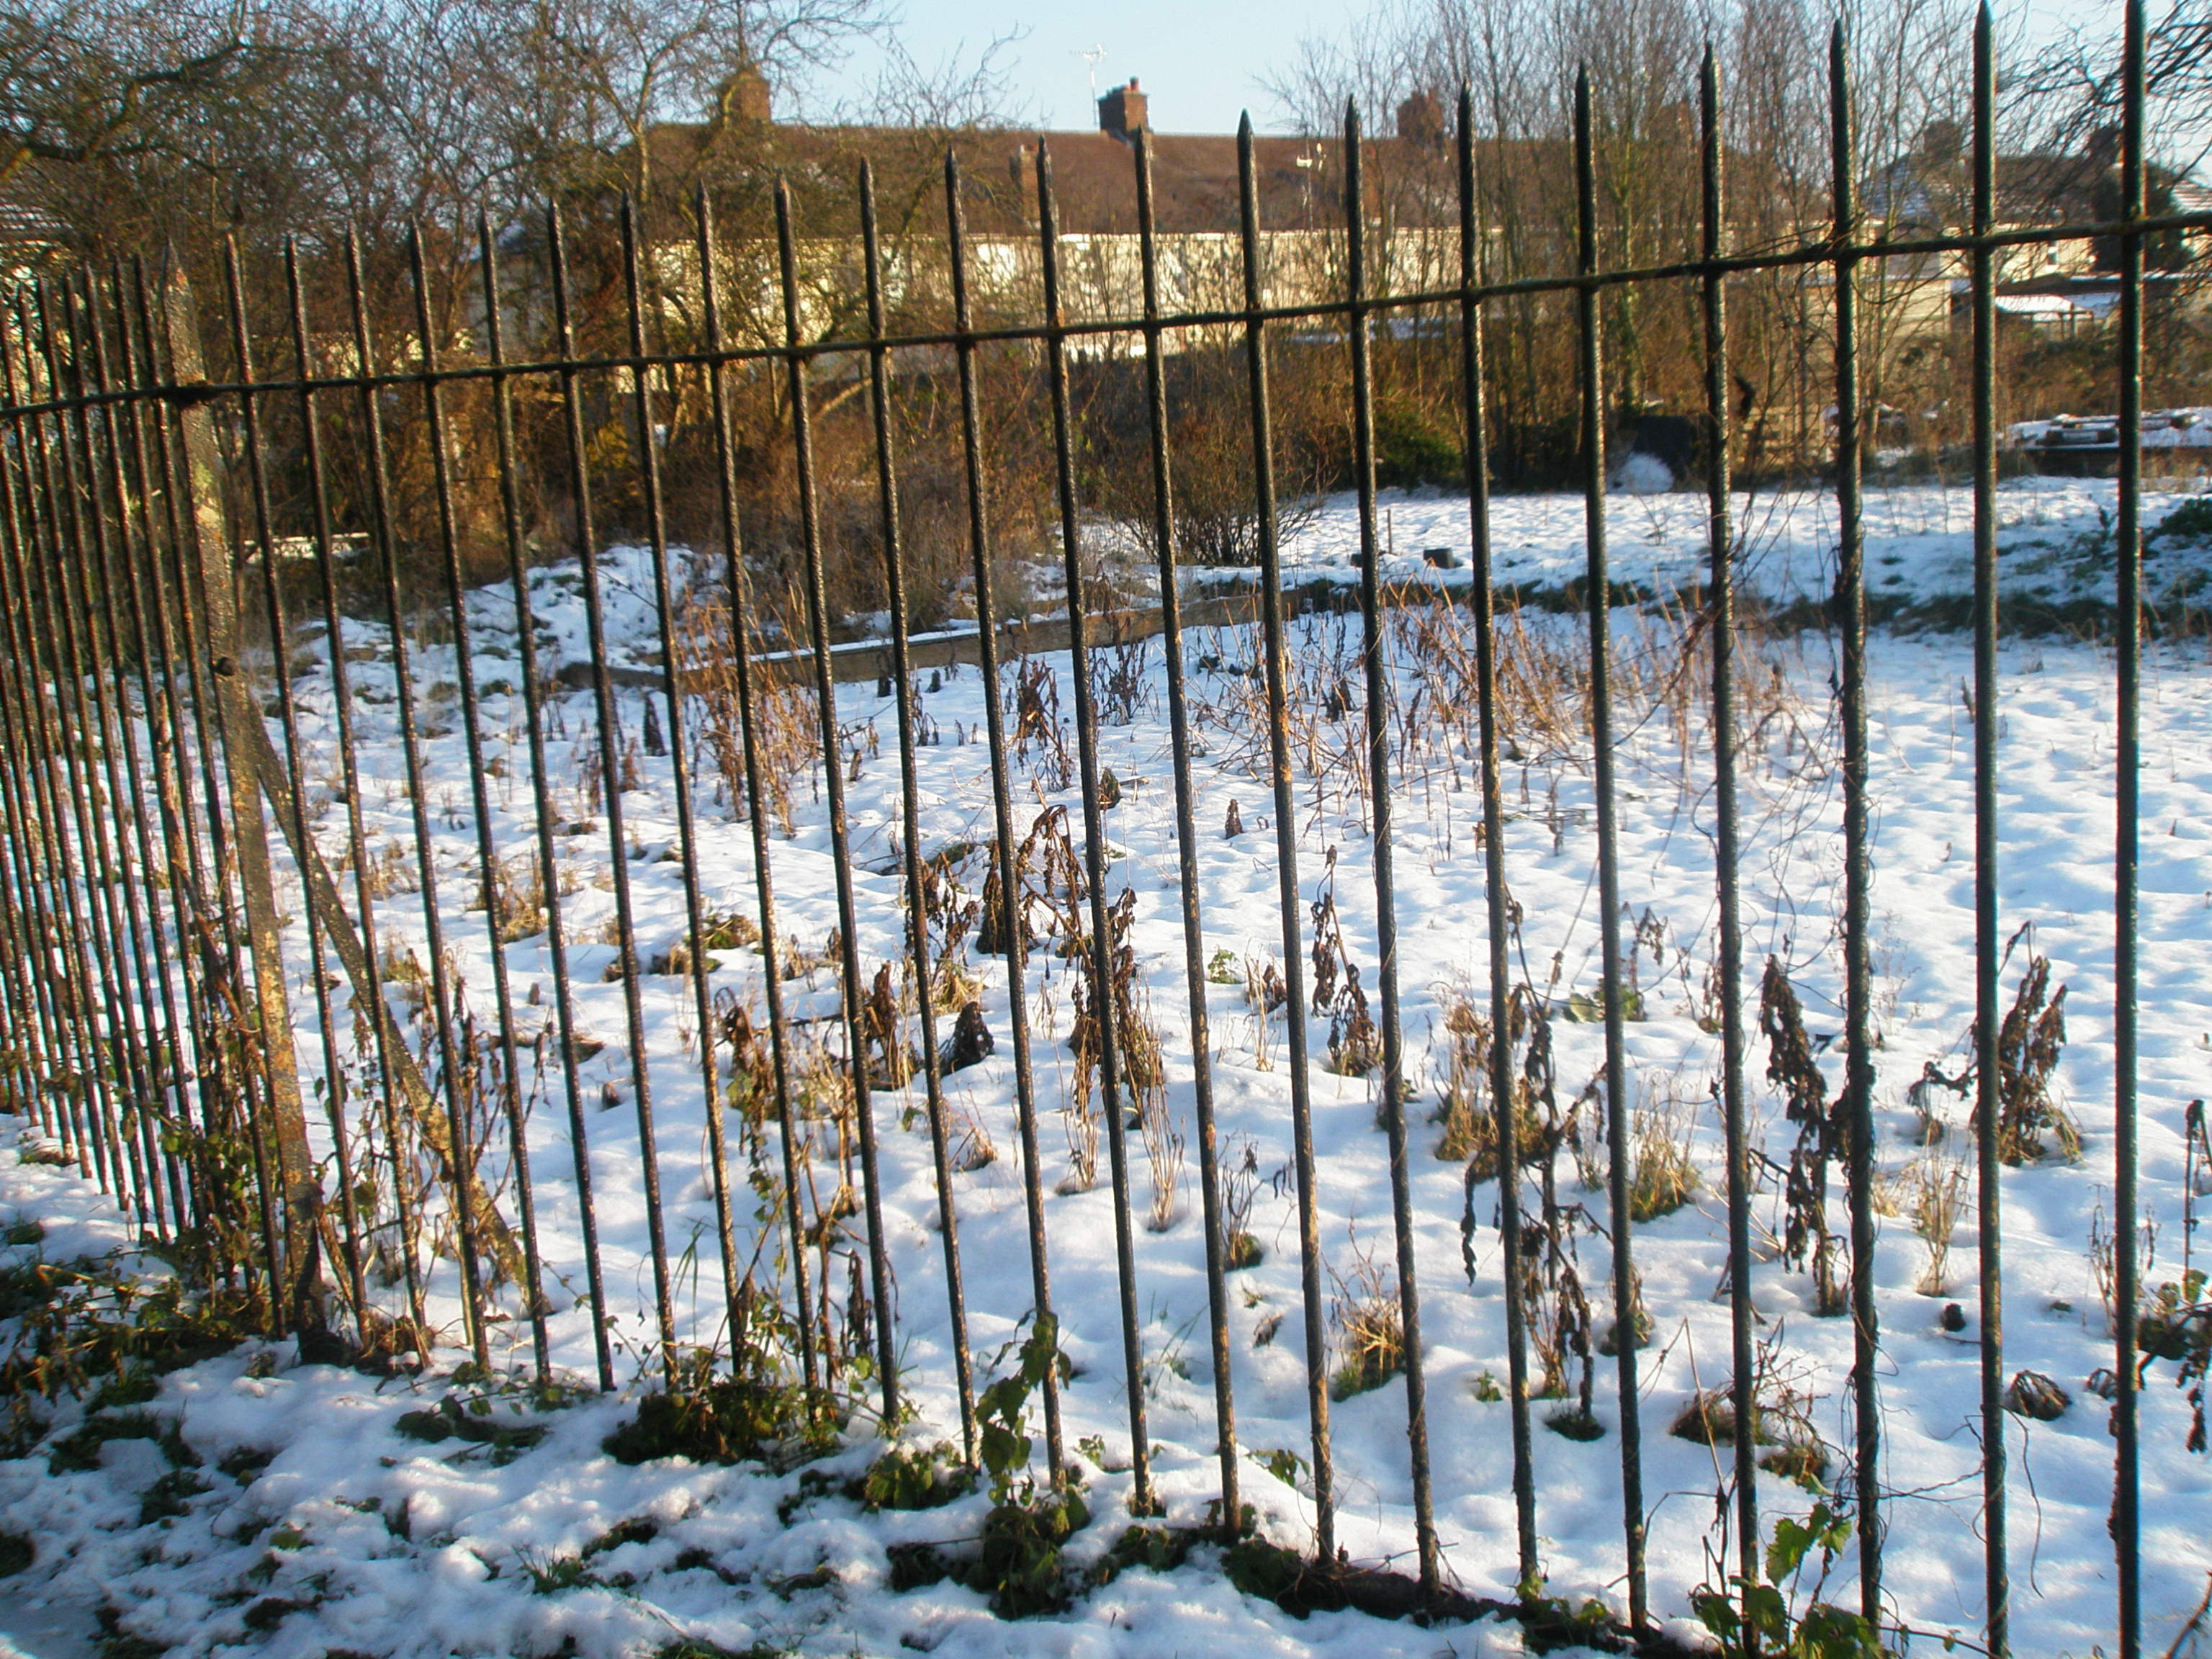 Snow on the allotments